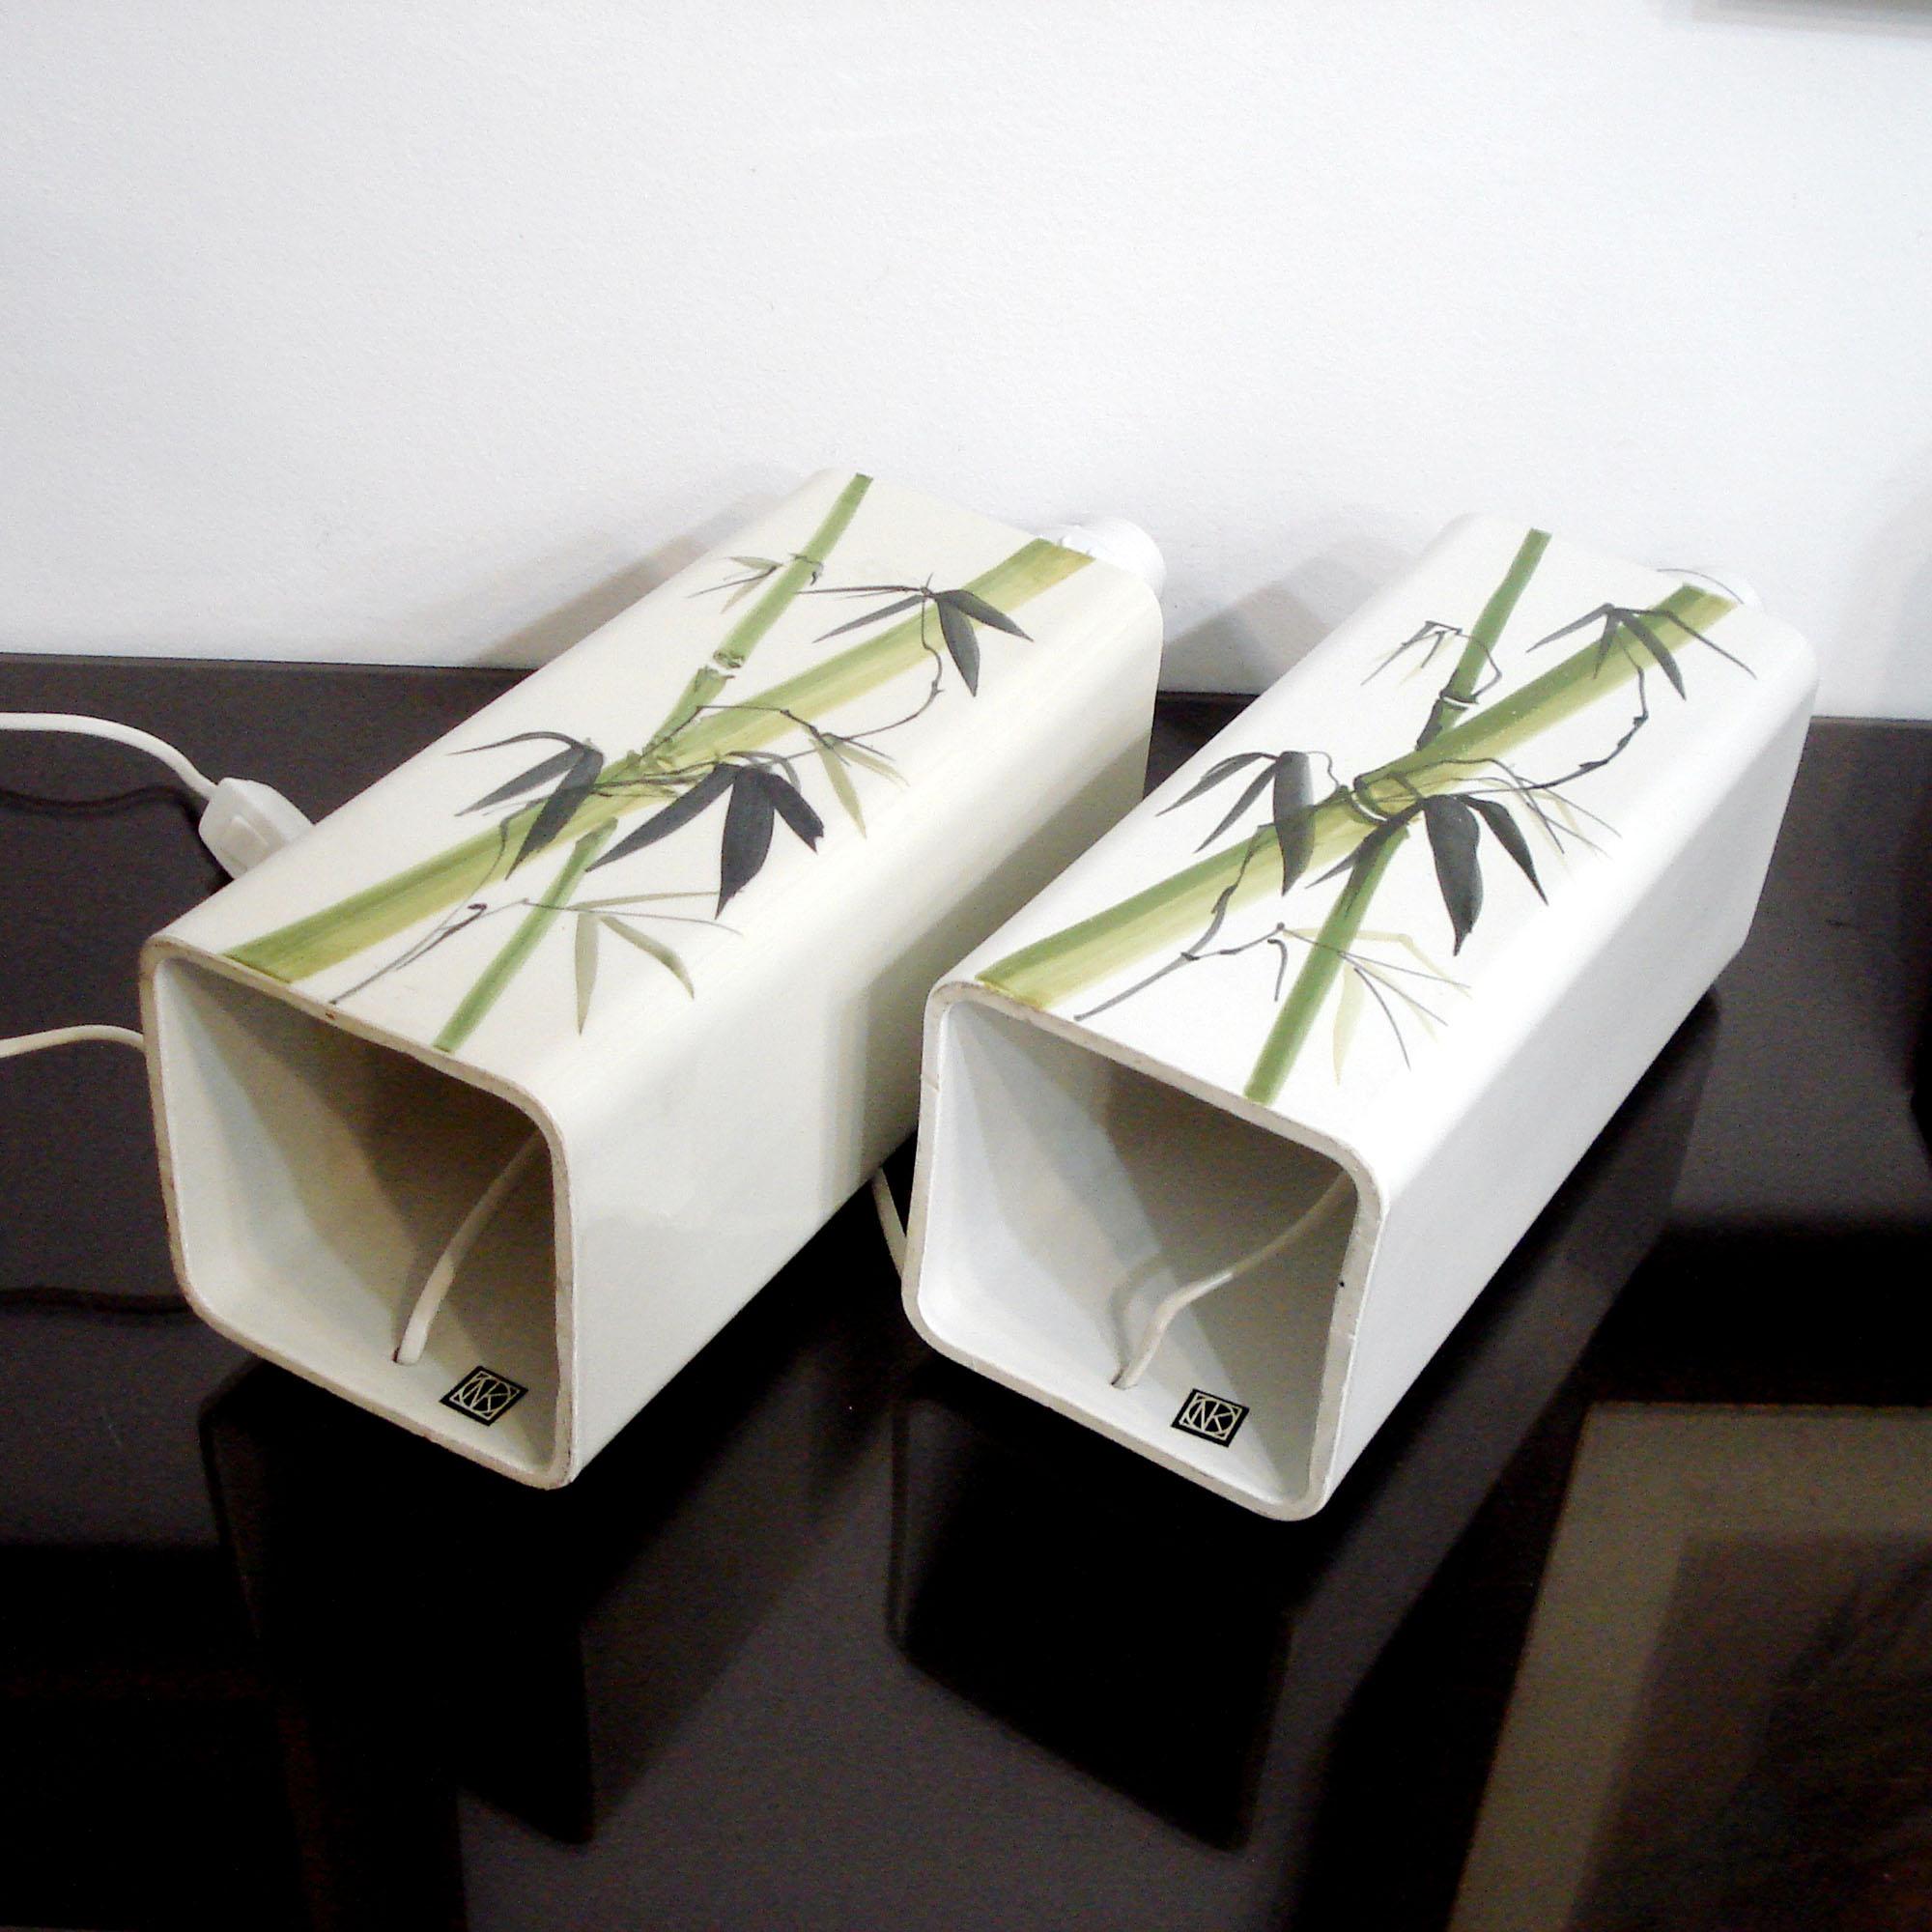 Pair of Ceramic Table Lamps Bamboo Decor by Nordiska Kompaniet, Sweden 1960s For Sale 1